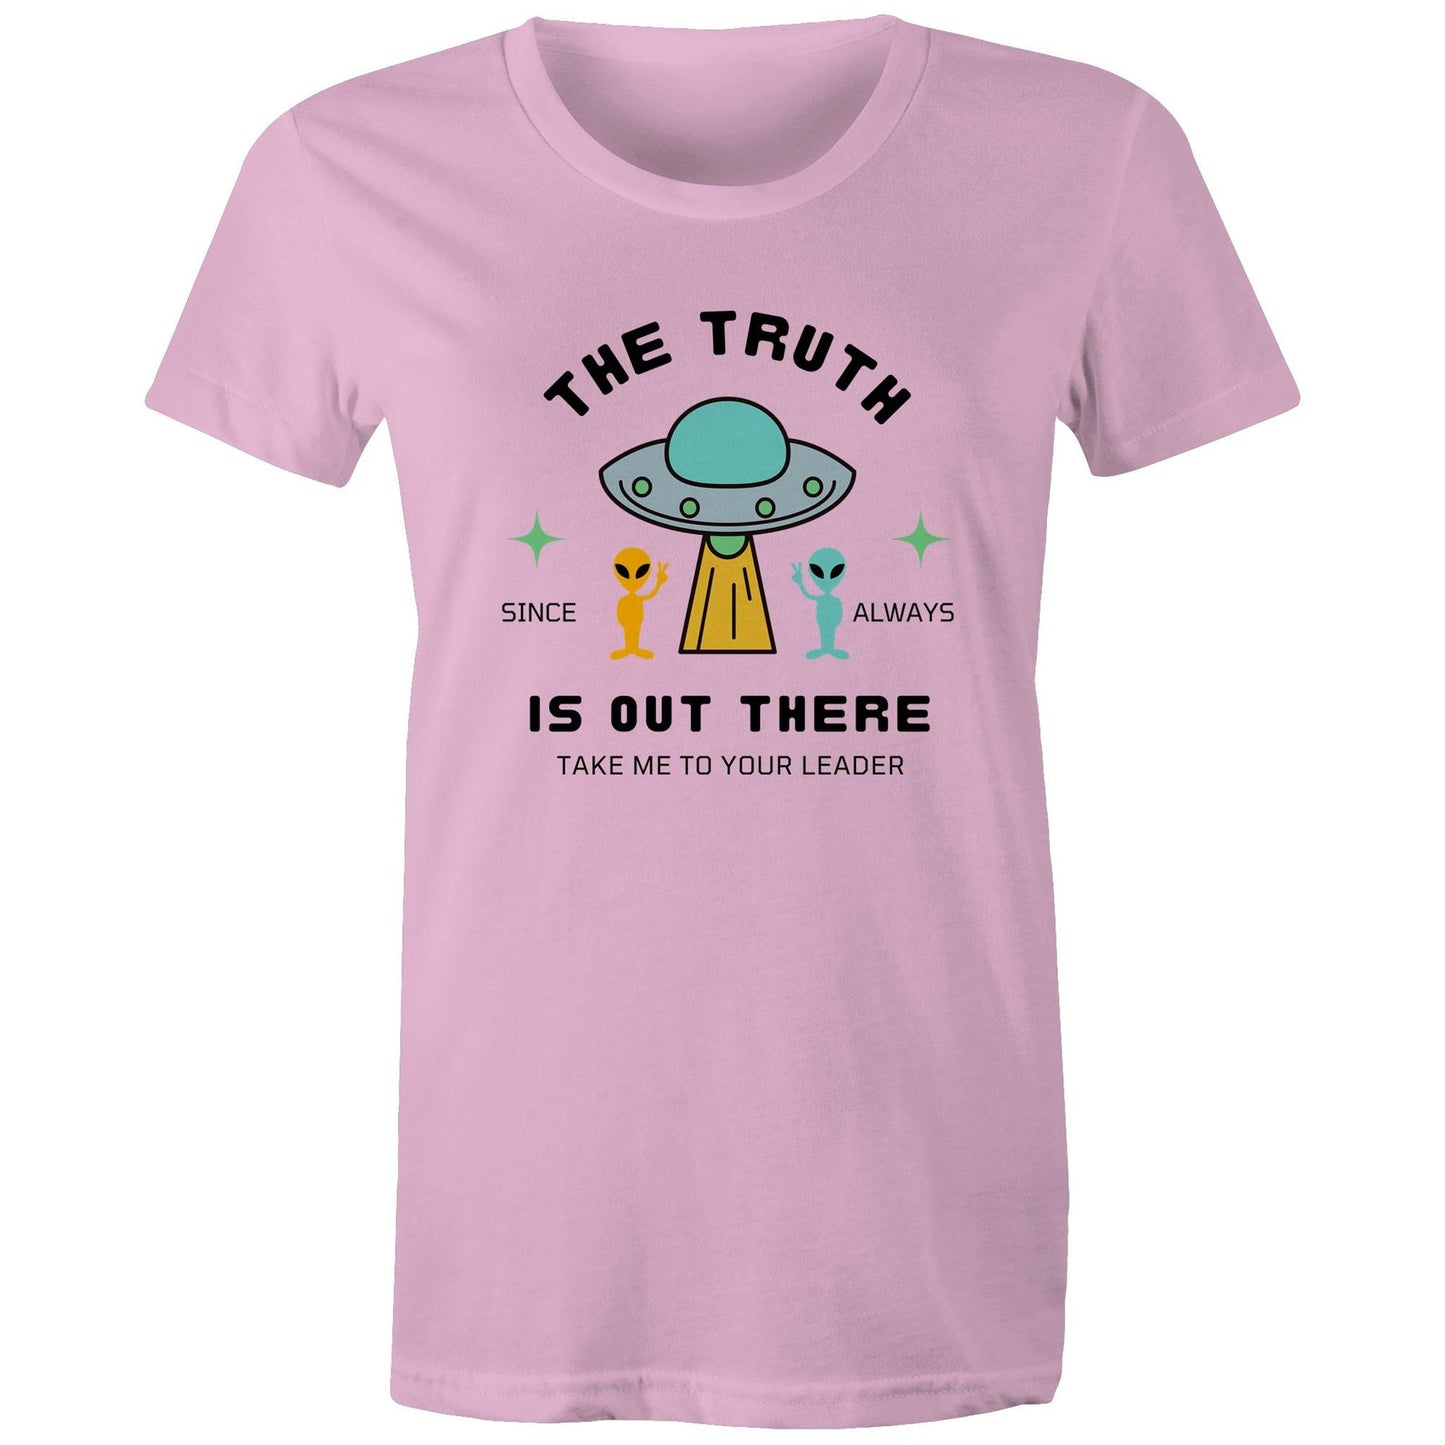 The Truth Is Out There - Womens T-shirt Pink Womens T-shirt Sci Fi